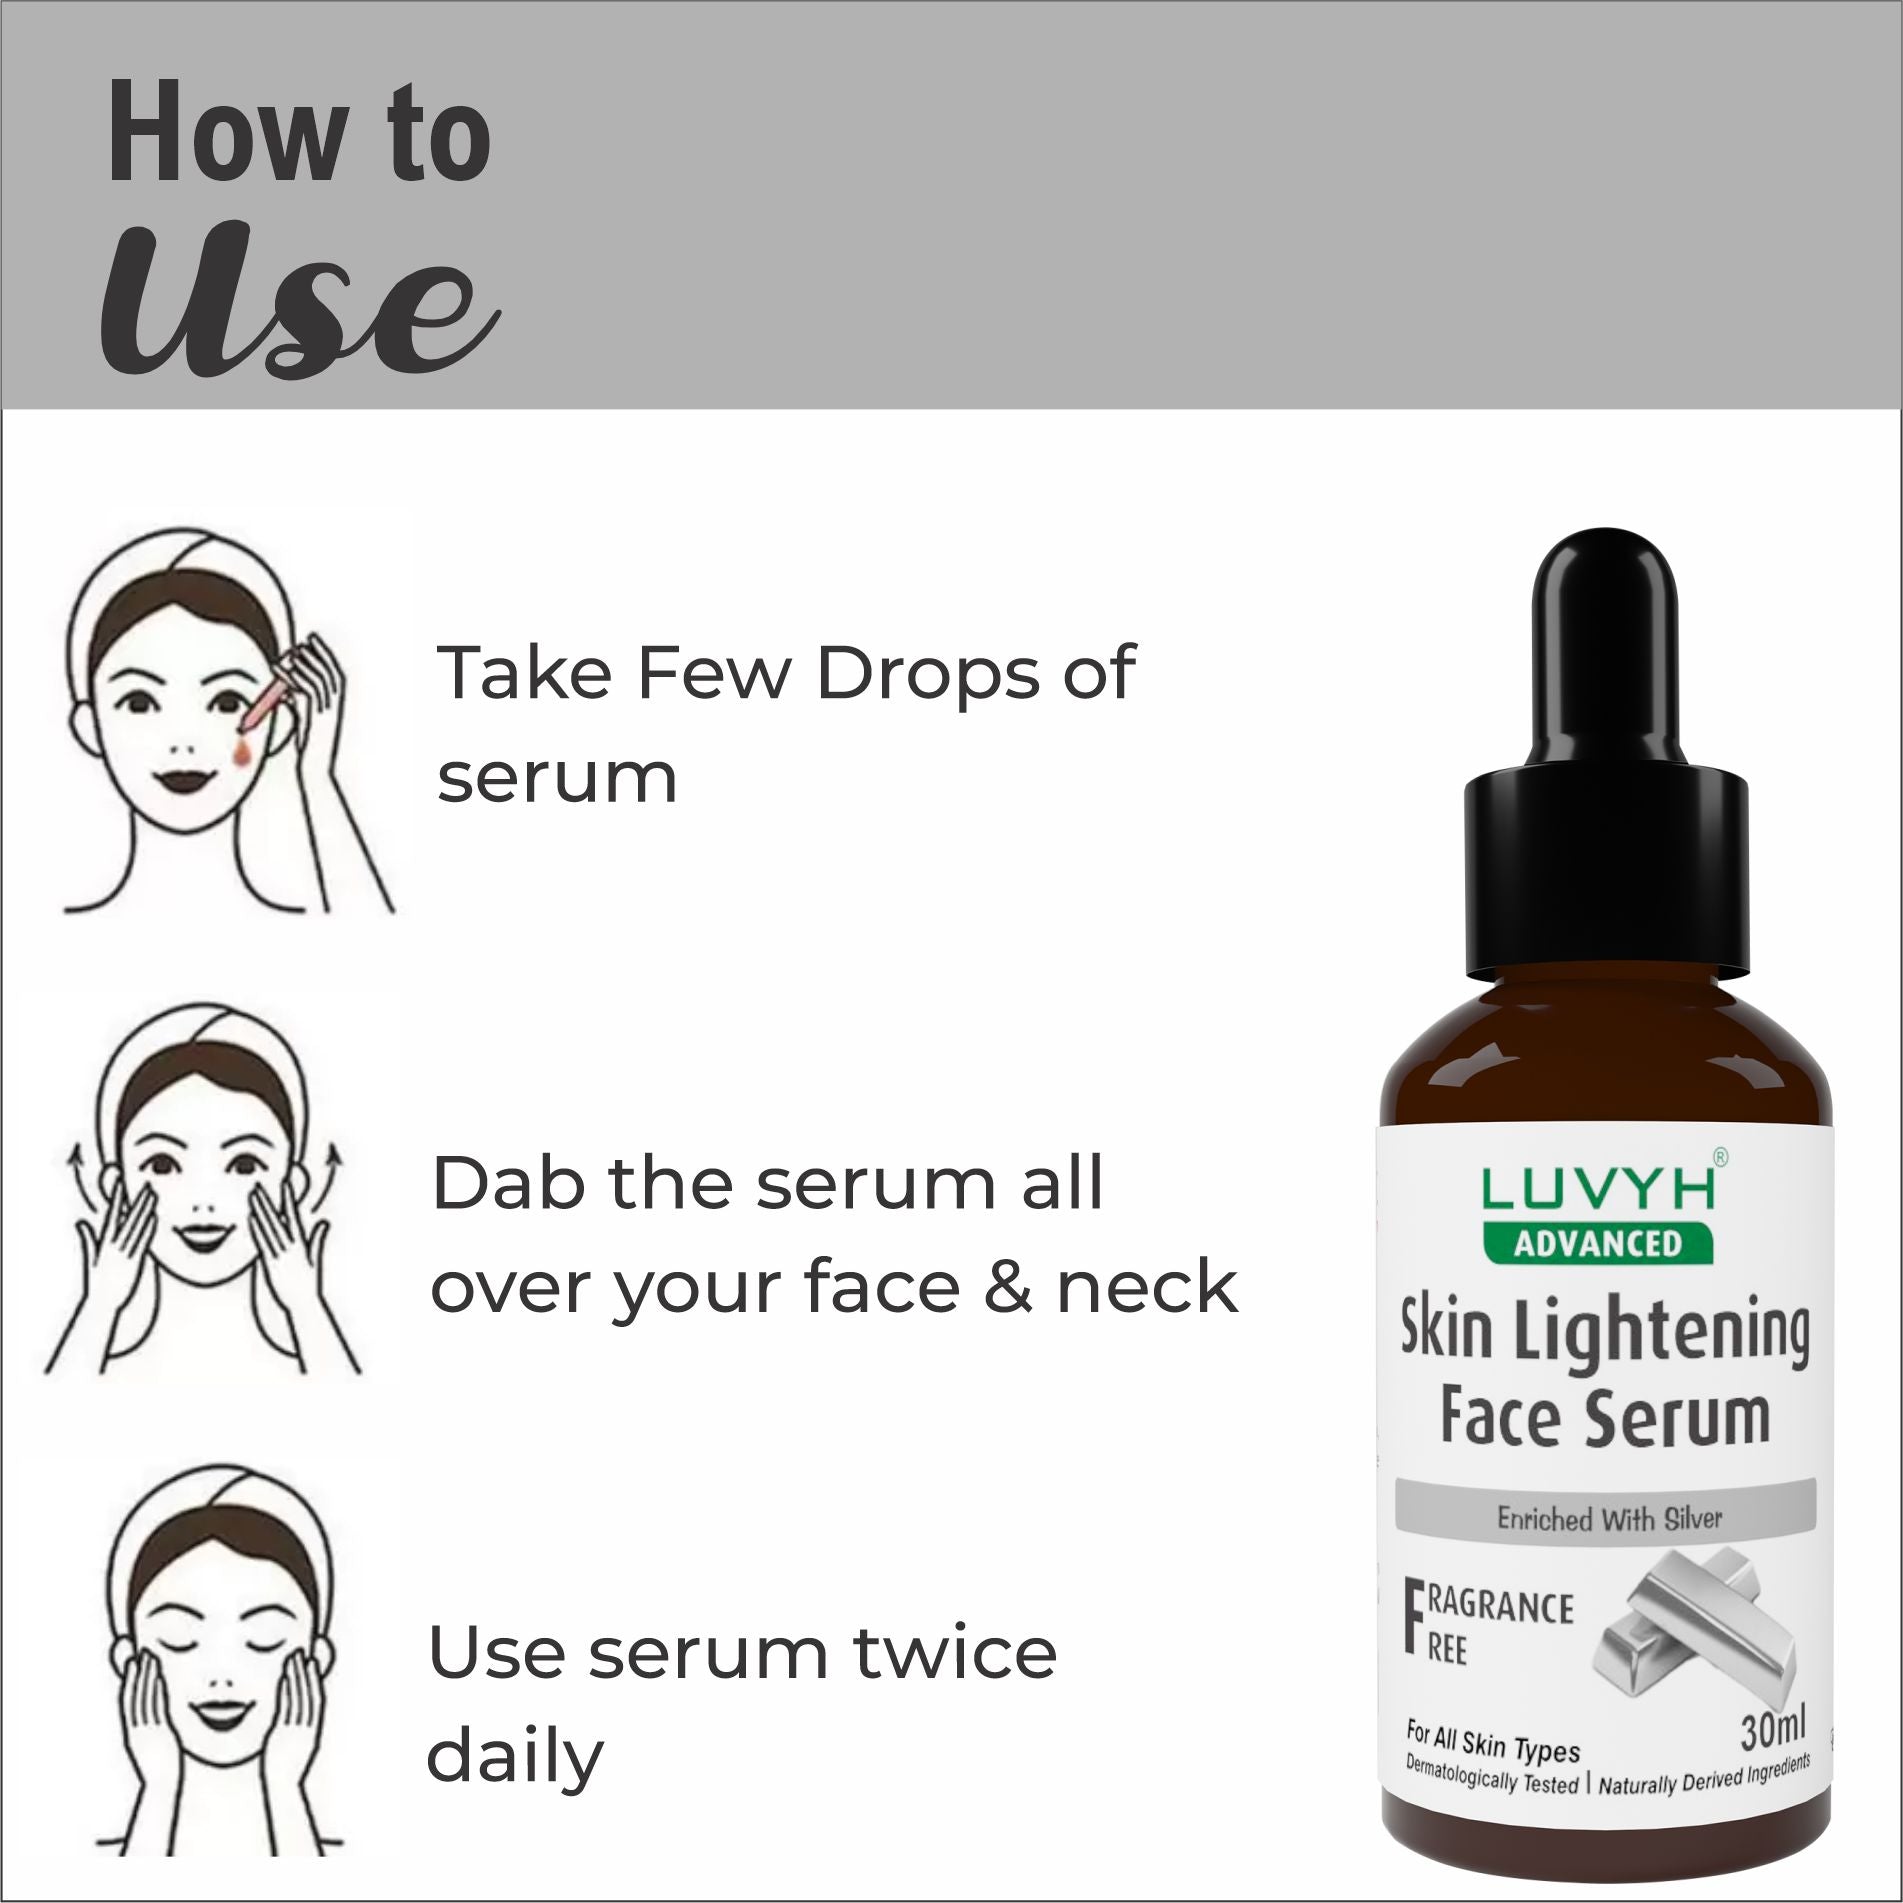 How to use Skin Lightening Face Serum enriched with Silver 